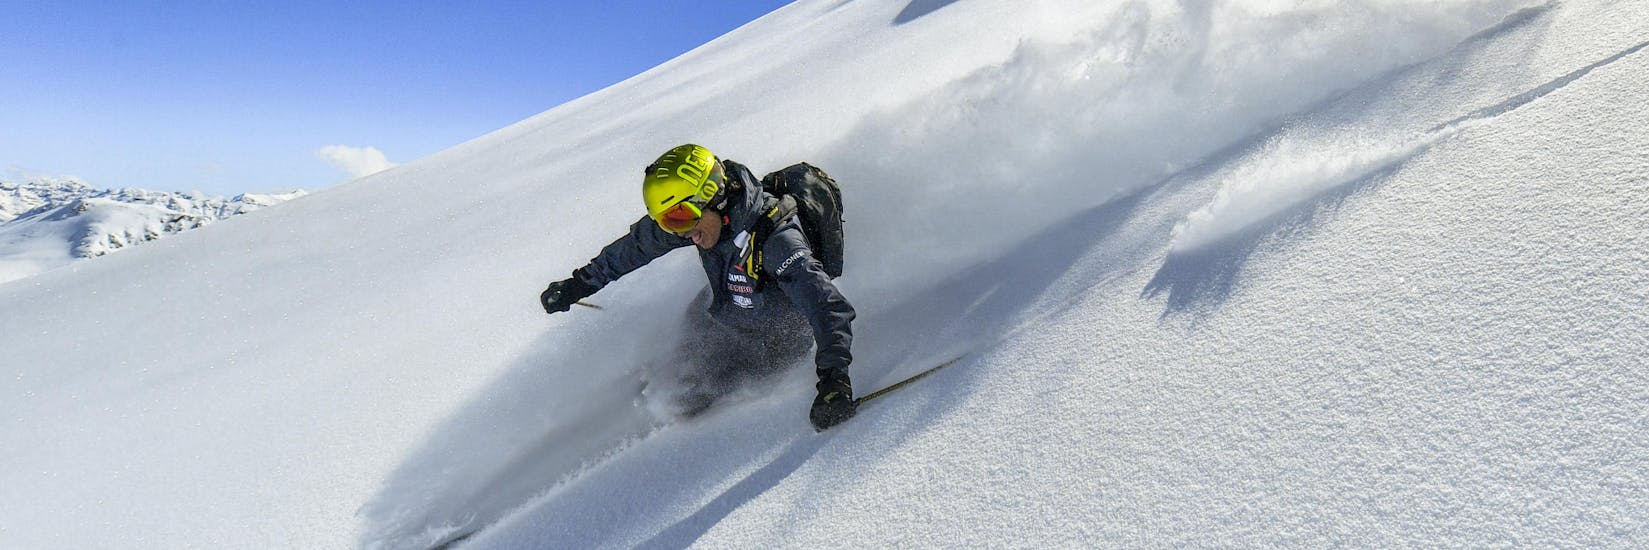 Private Off-Piste Skiing Lessons for Advanced Skiers with  Giorgio Rocca Ski Academy St.Moritz.